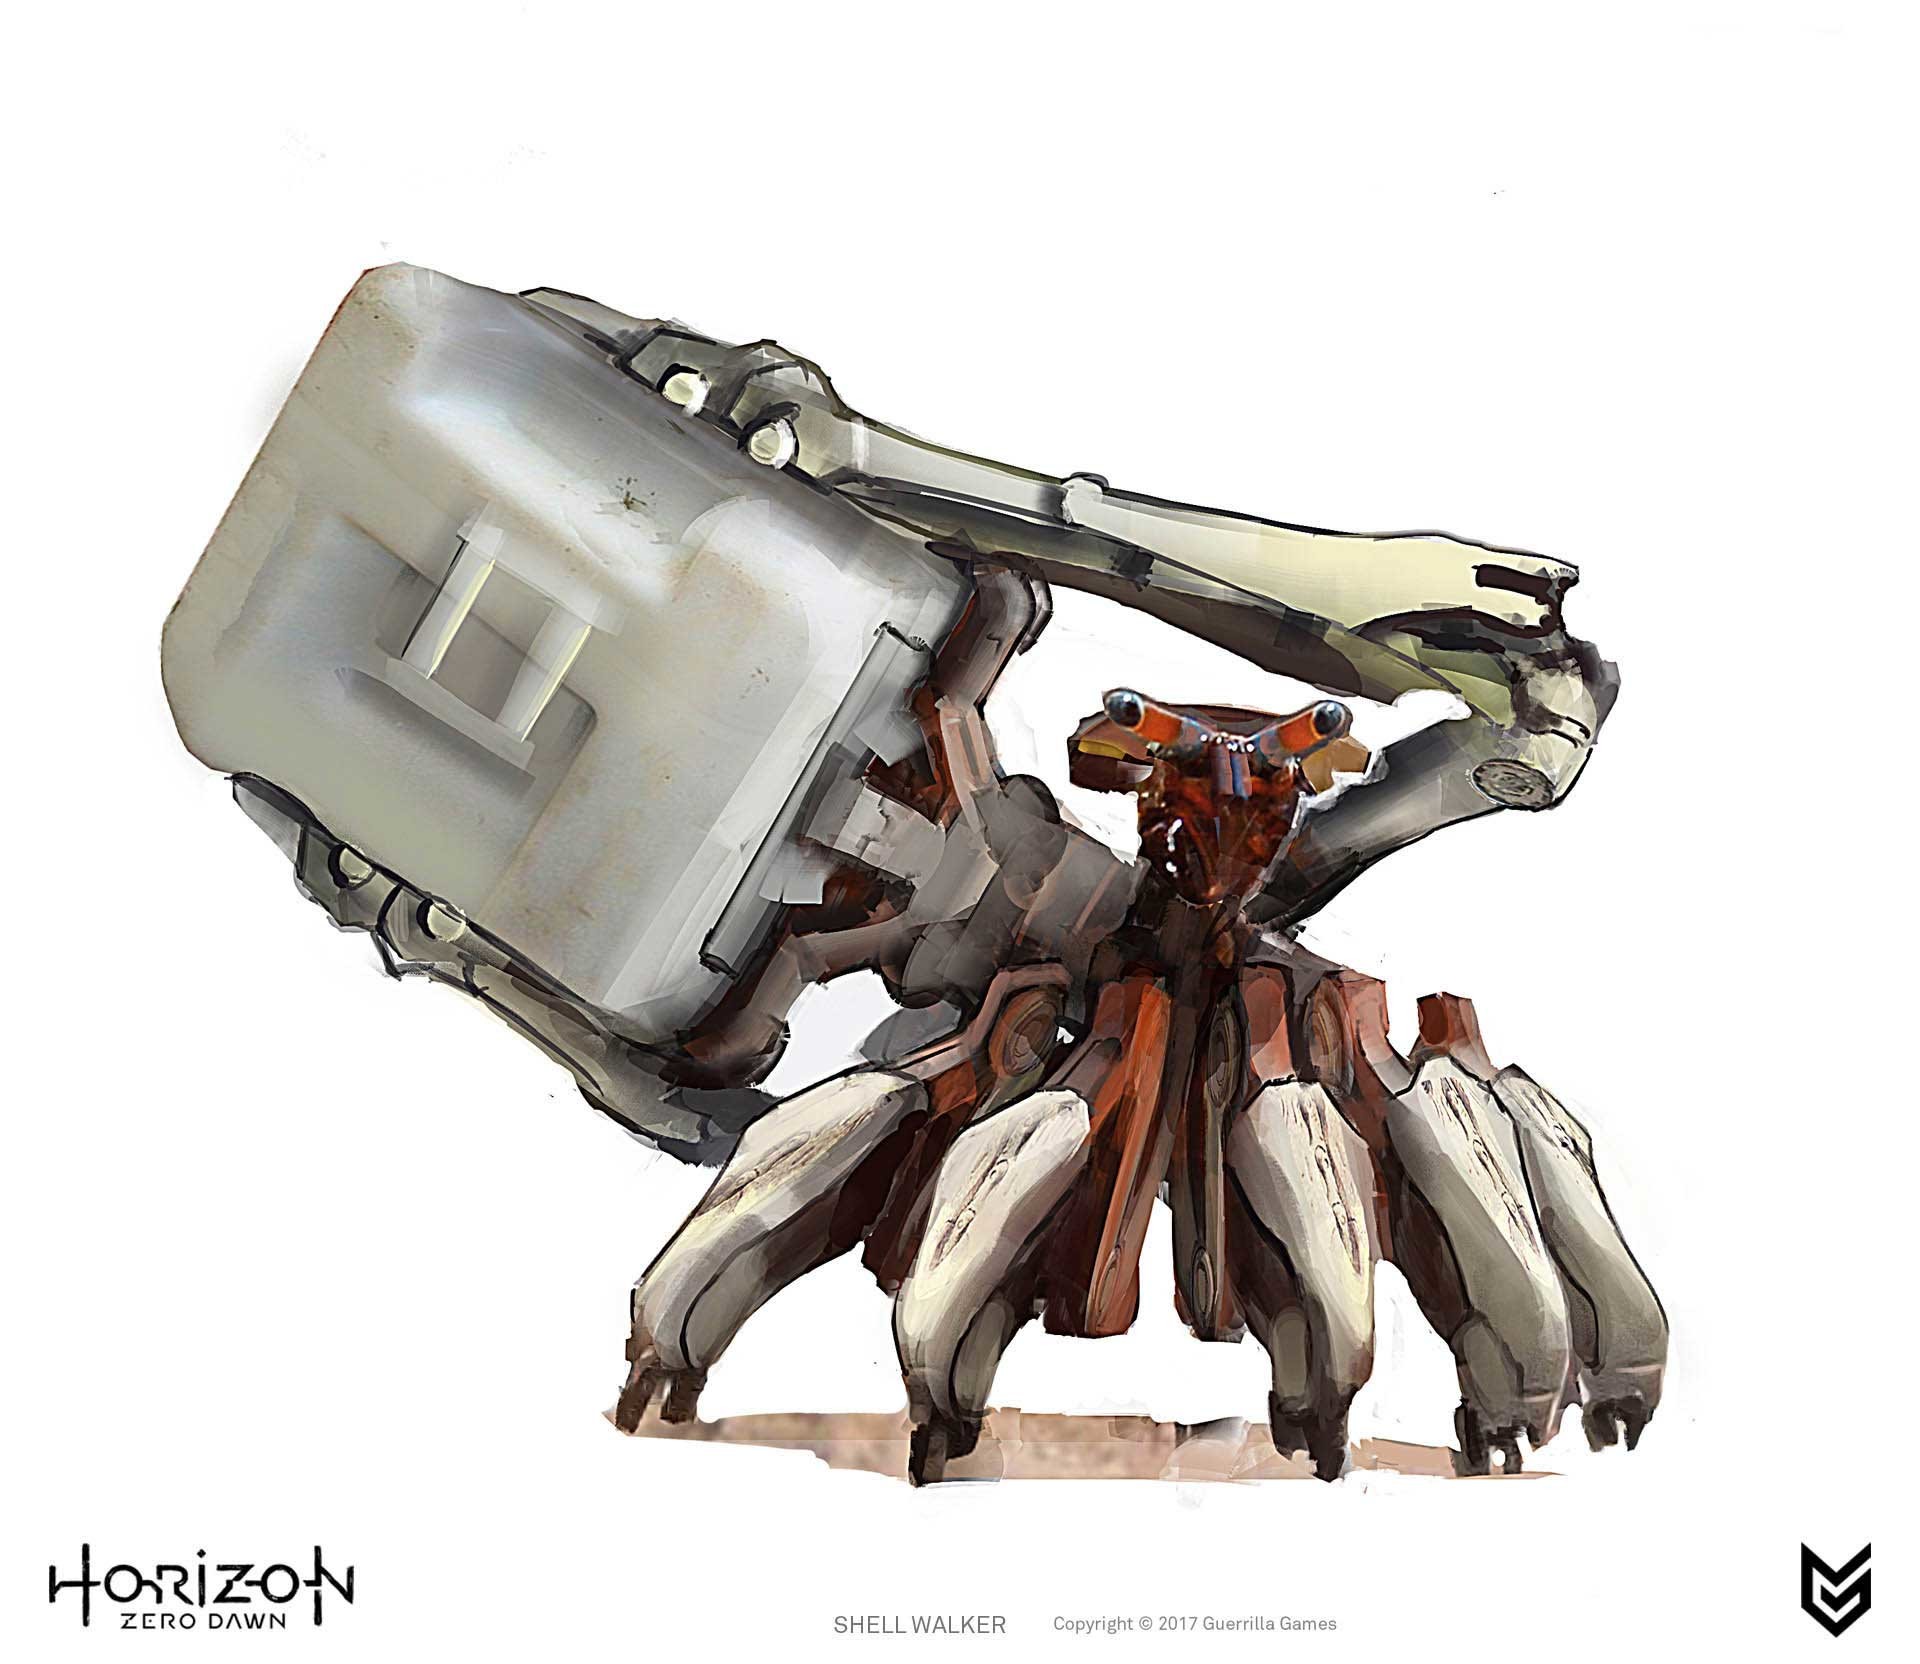 Horizon Zero Dawn Shell Walker Miguel Angel Martinez These Are Some Of The Concept Stages For The Shell Walker Its Main Function Was To Transport Resources To The Robot Foundry